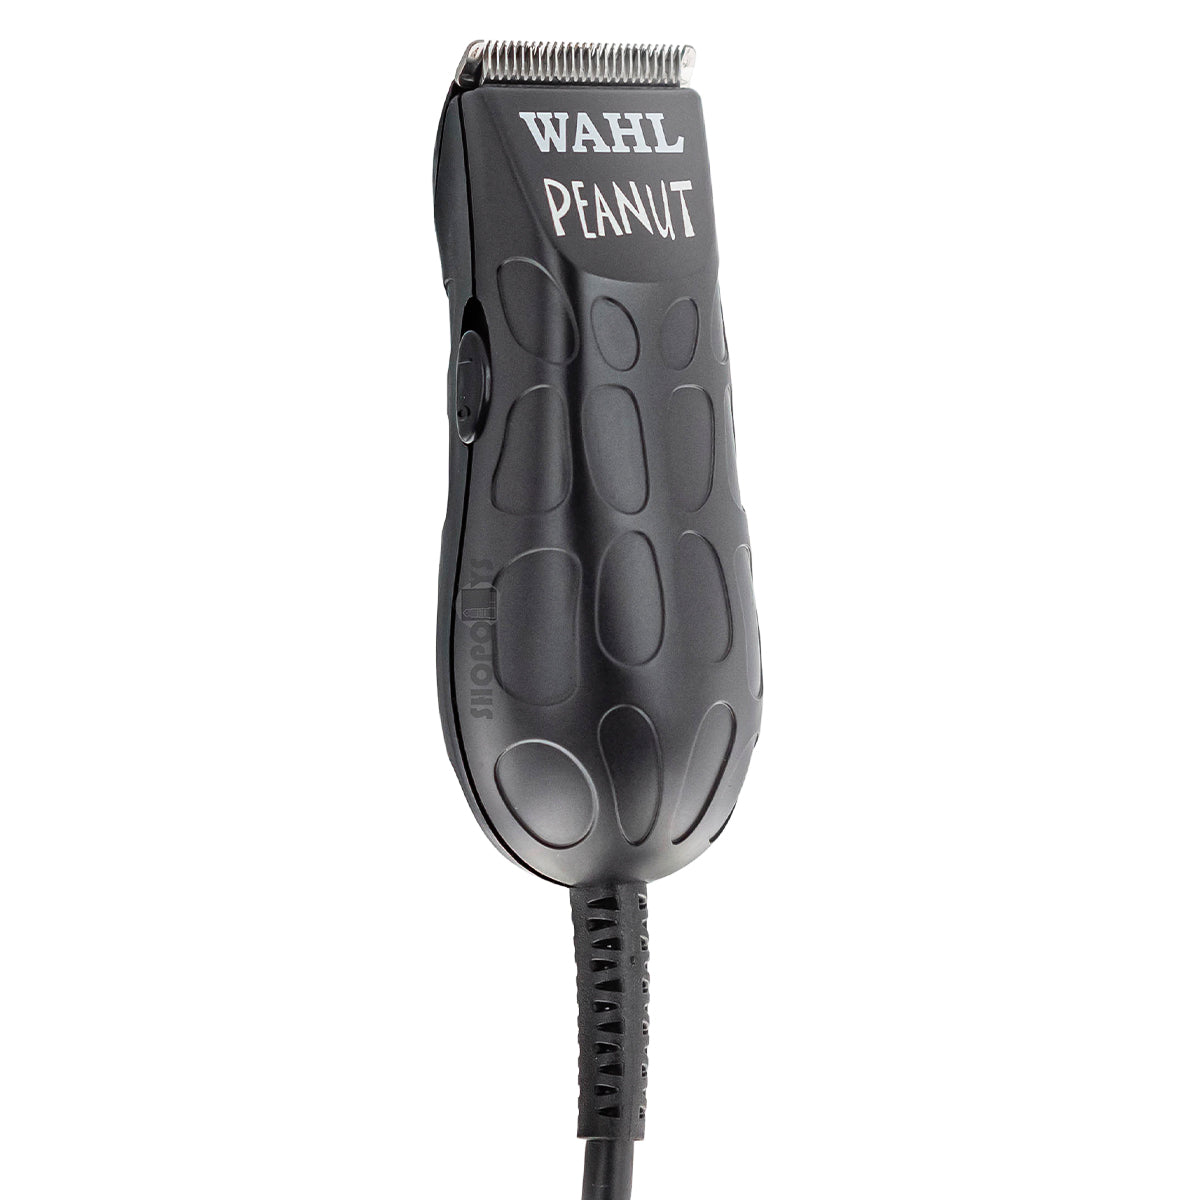 Trimmer Profesional Wahl Peanut